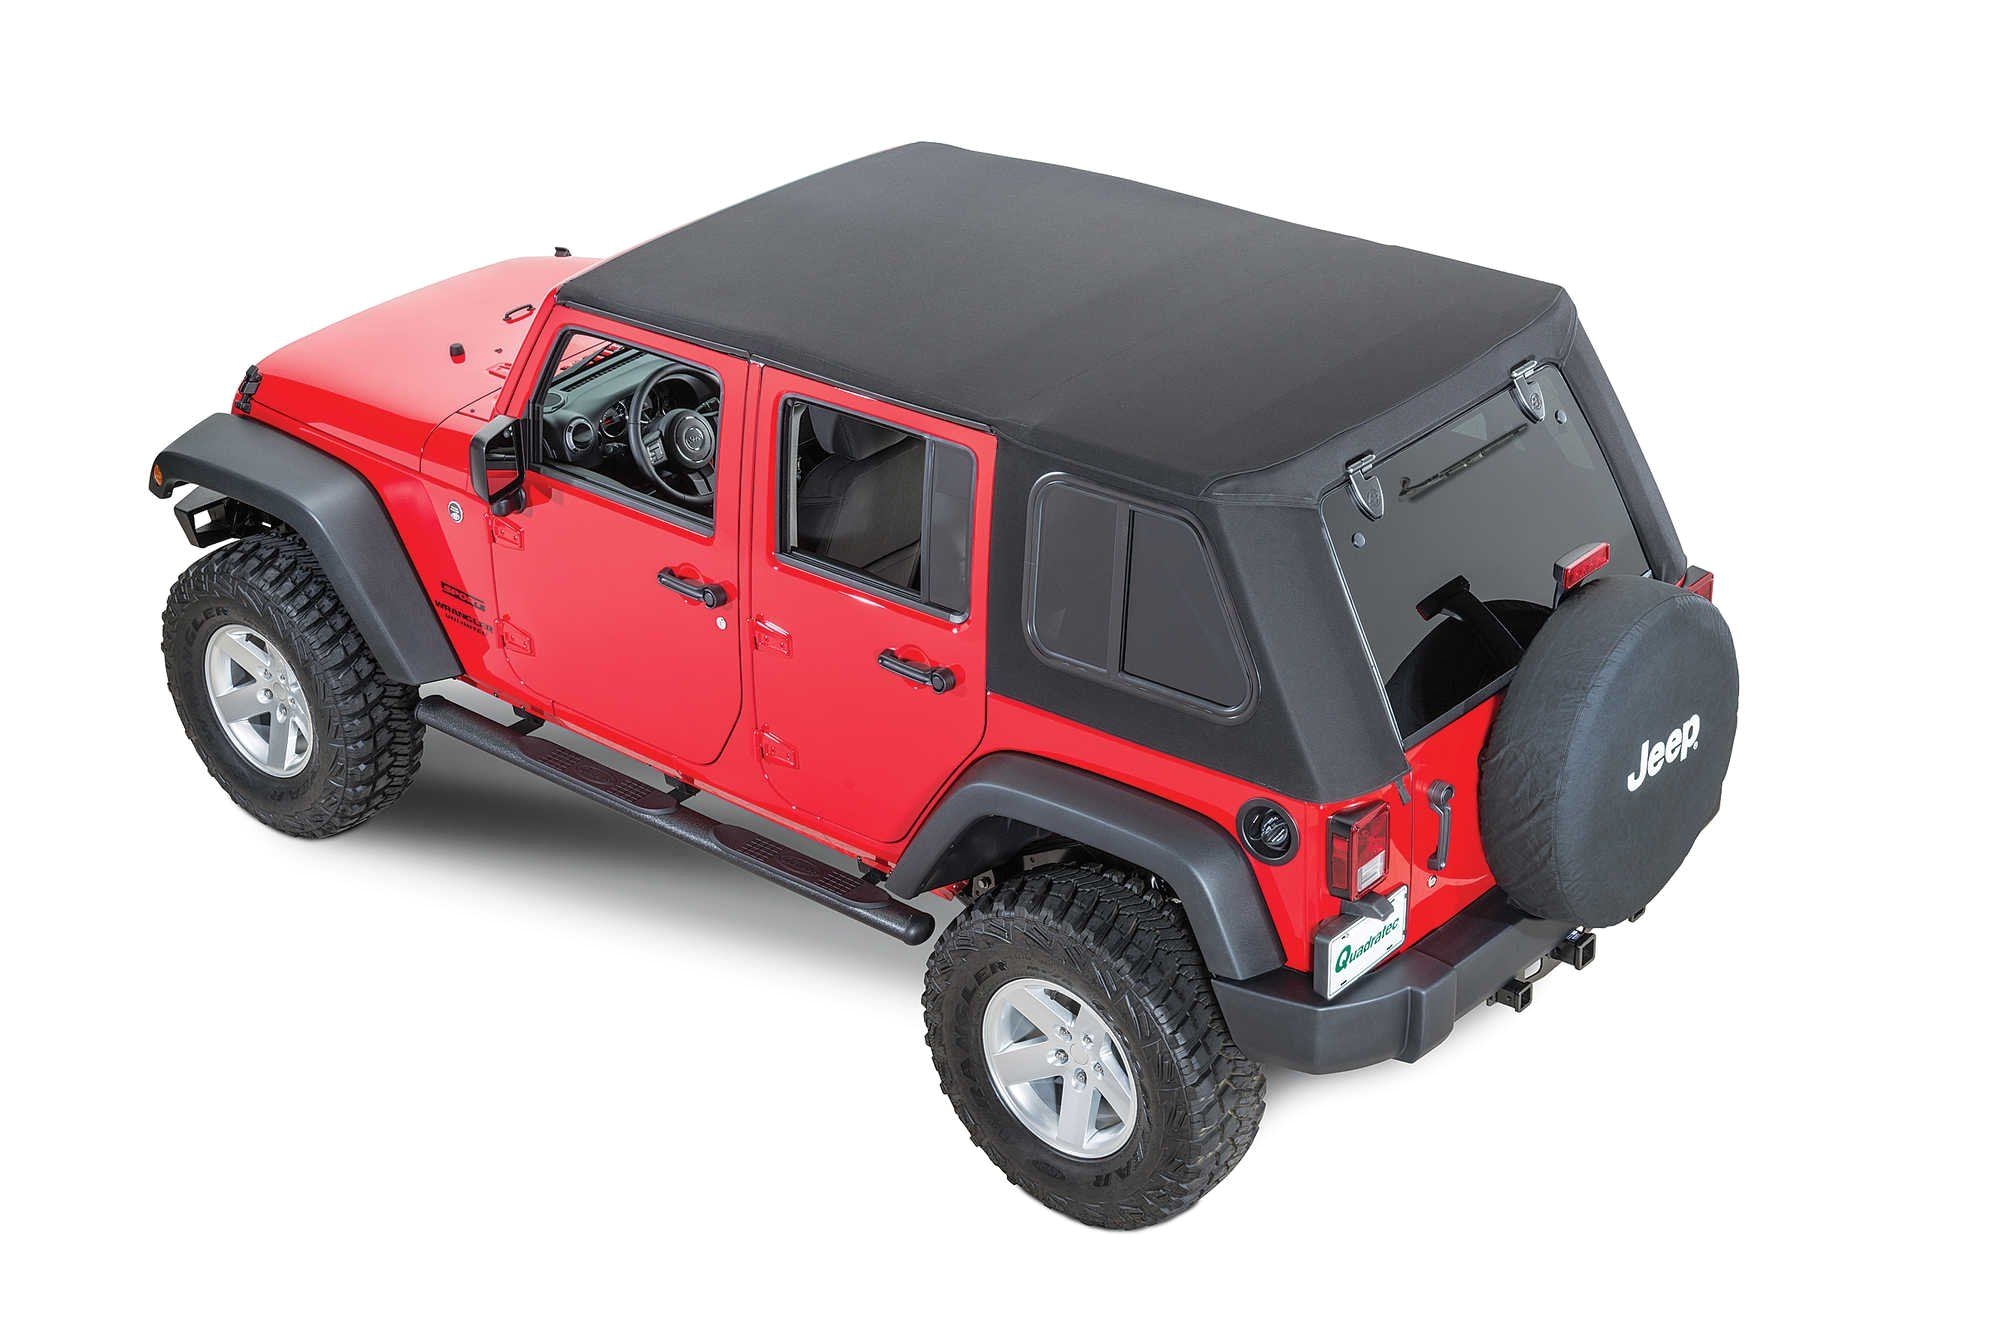 hardtop convenience with soft top versatility introducing the trektopa pro the next step in soft top design for wrangler jk s